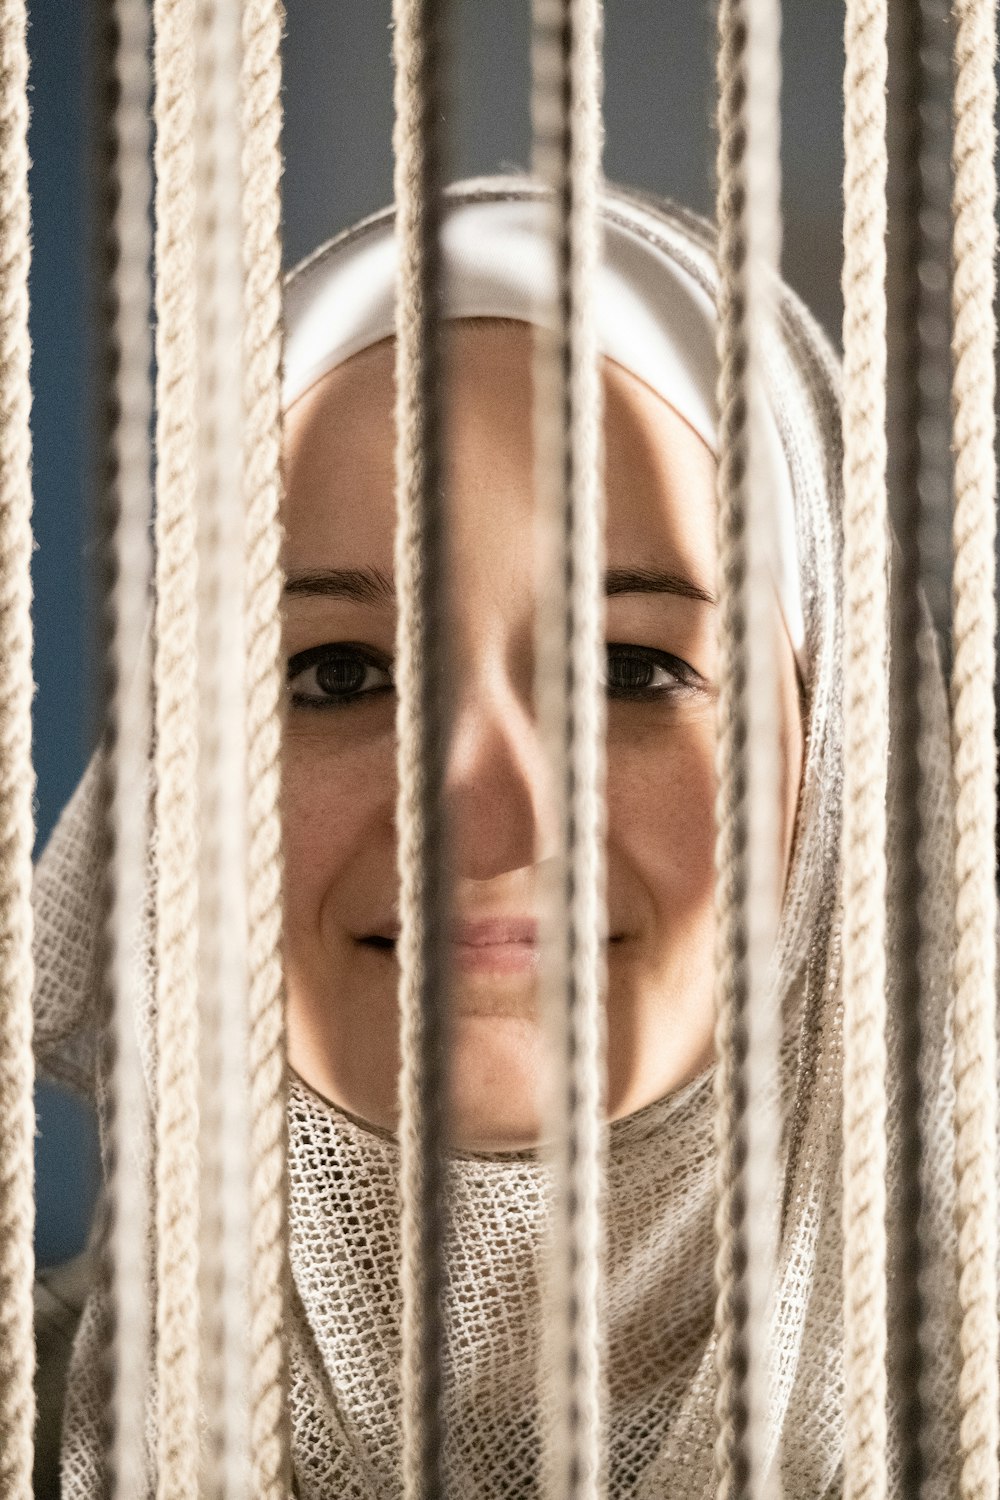 a woman is smiling behind the bars of a cage